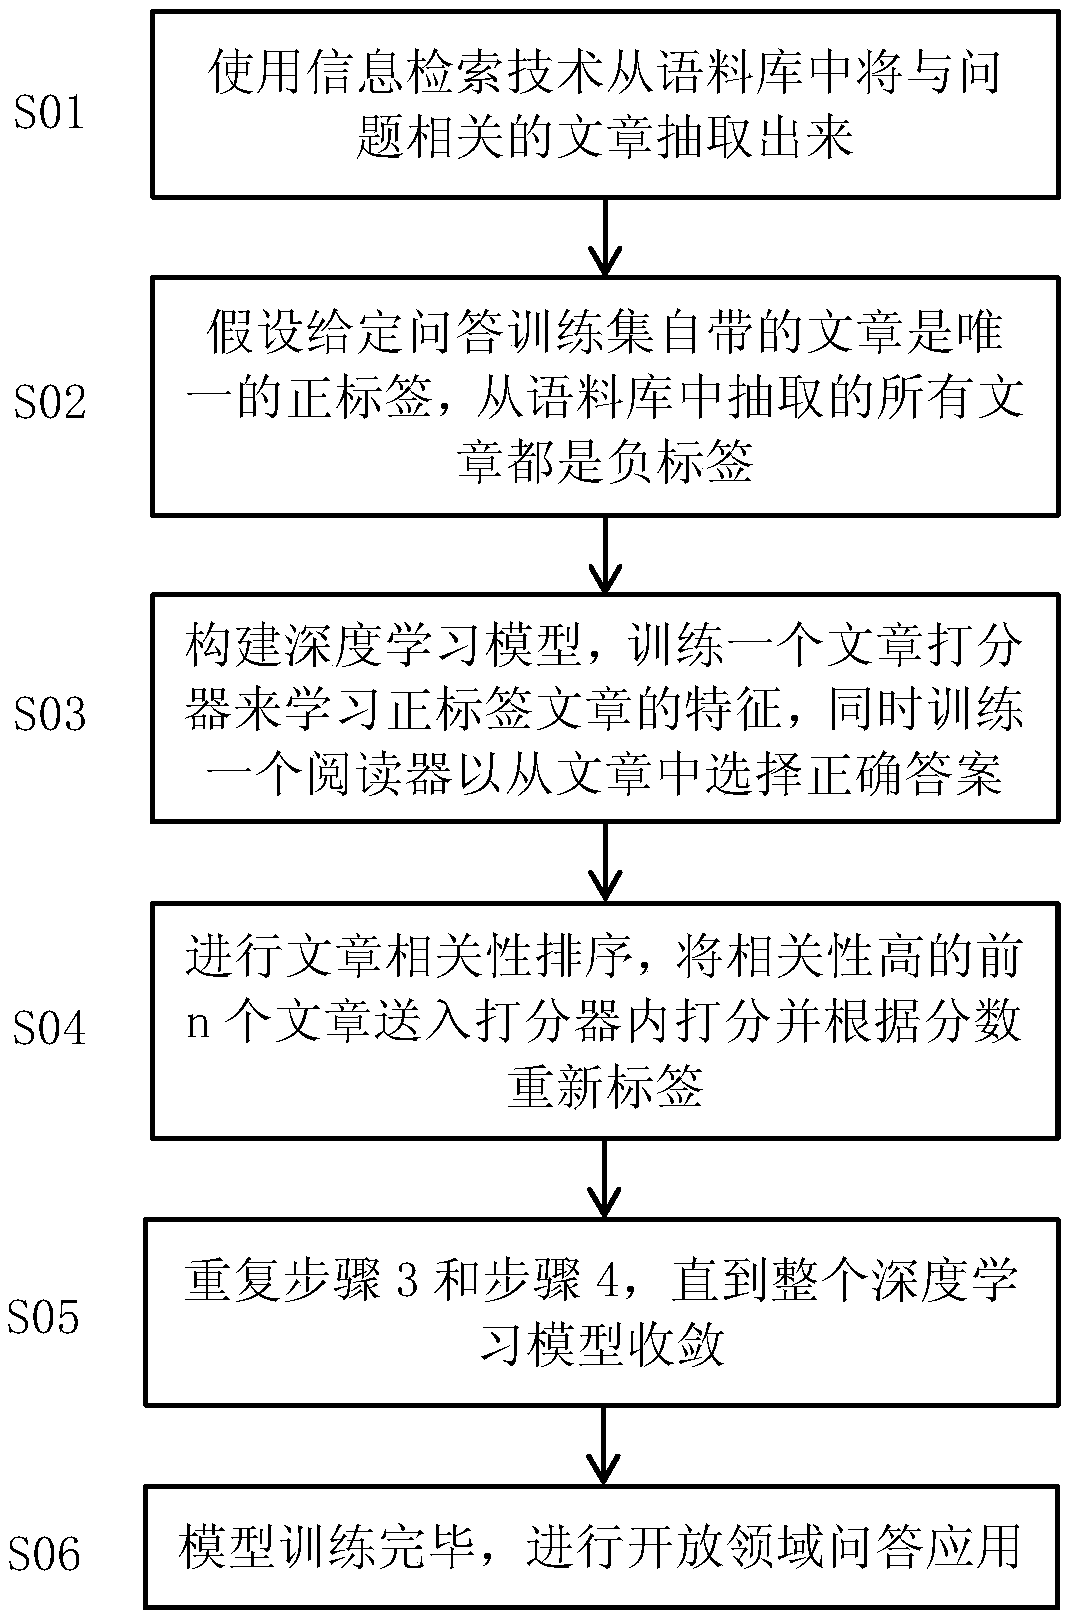 Hypothetical semi-supervised learning based open domain question answering method